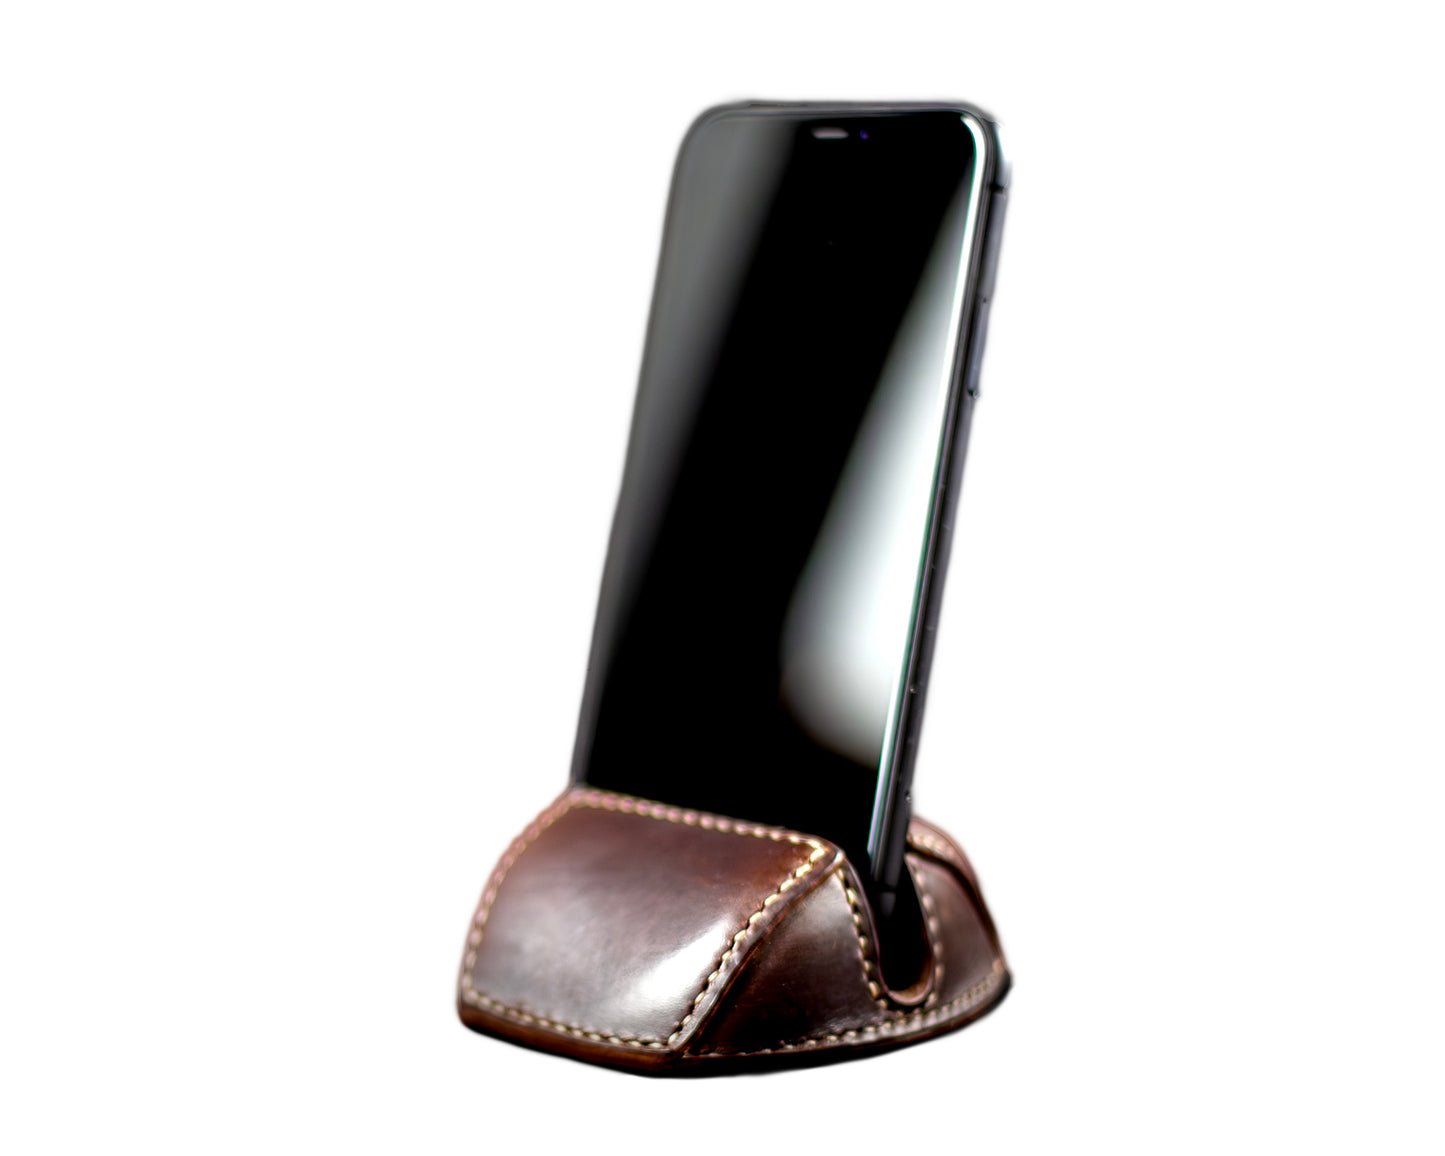 Compact Phone Stand - Leather Craft PDF Pattern Download with Video Tutorial